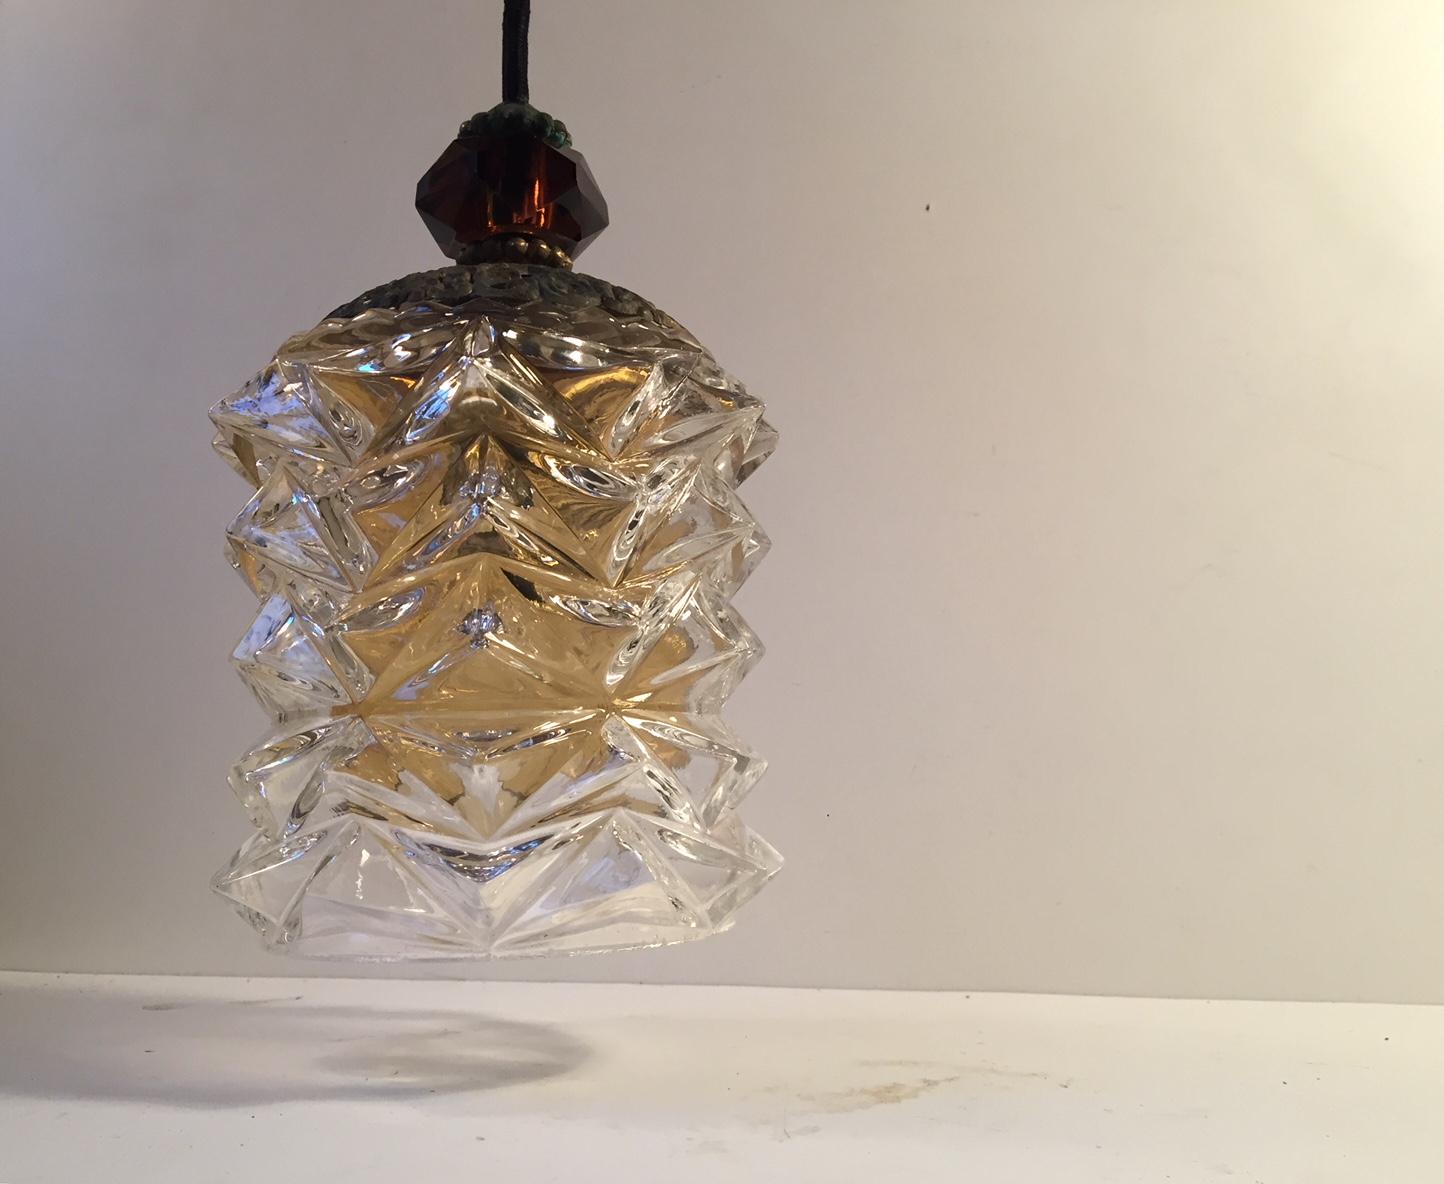 A spiky Scandinavian Modern crystal pendant light that creates a sunburst motif on the surface beneath it once lid. It features an amber glass inner shade and a amber colored faceted crystal top piece above a perforated and patinated brass sock. It